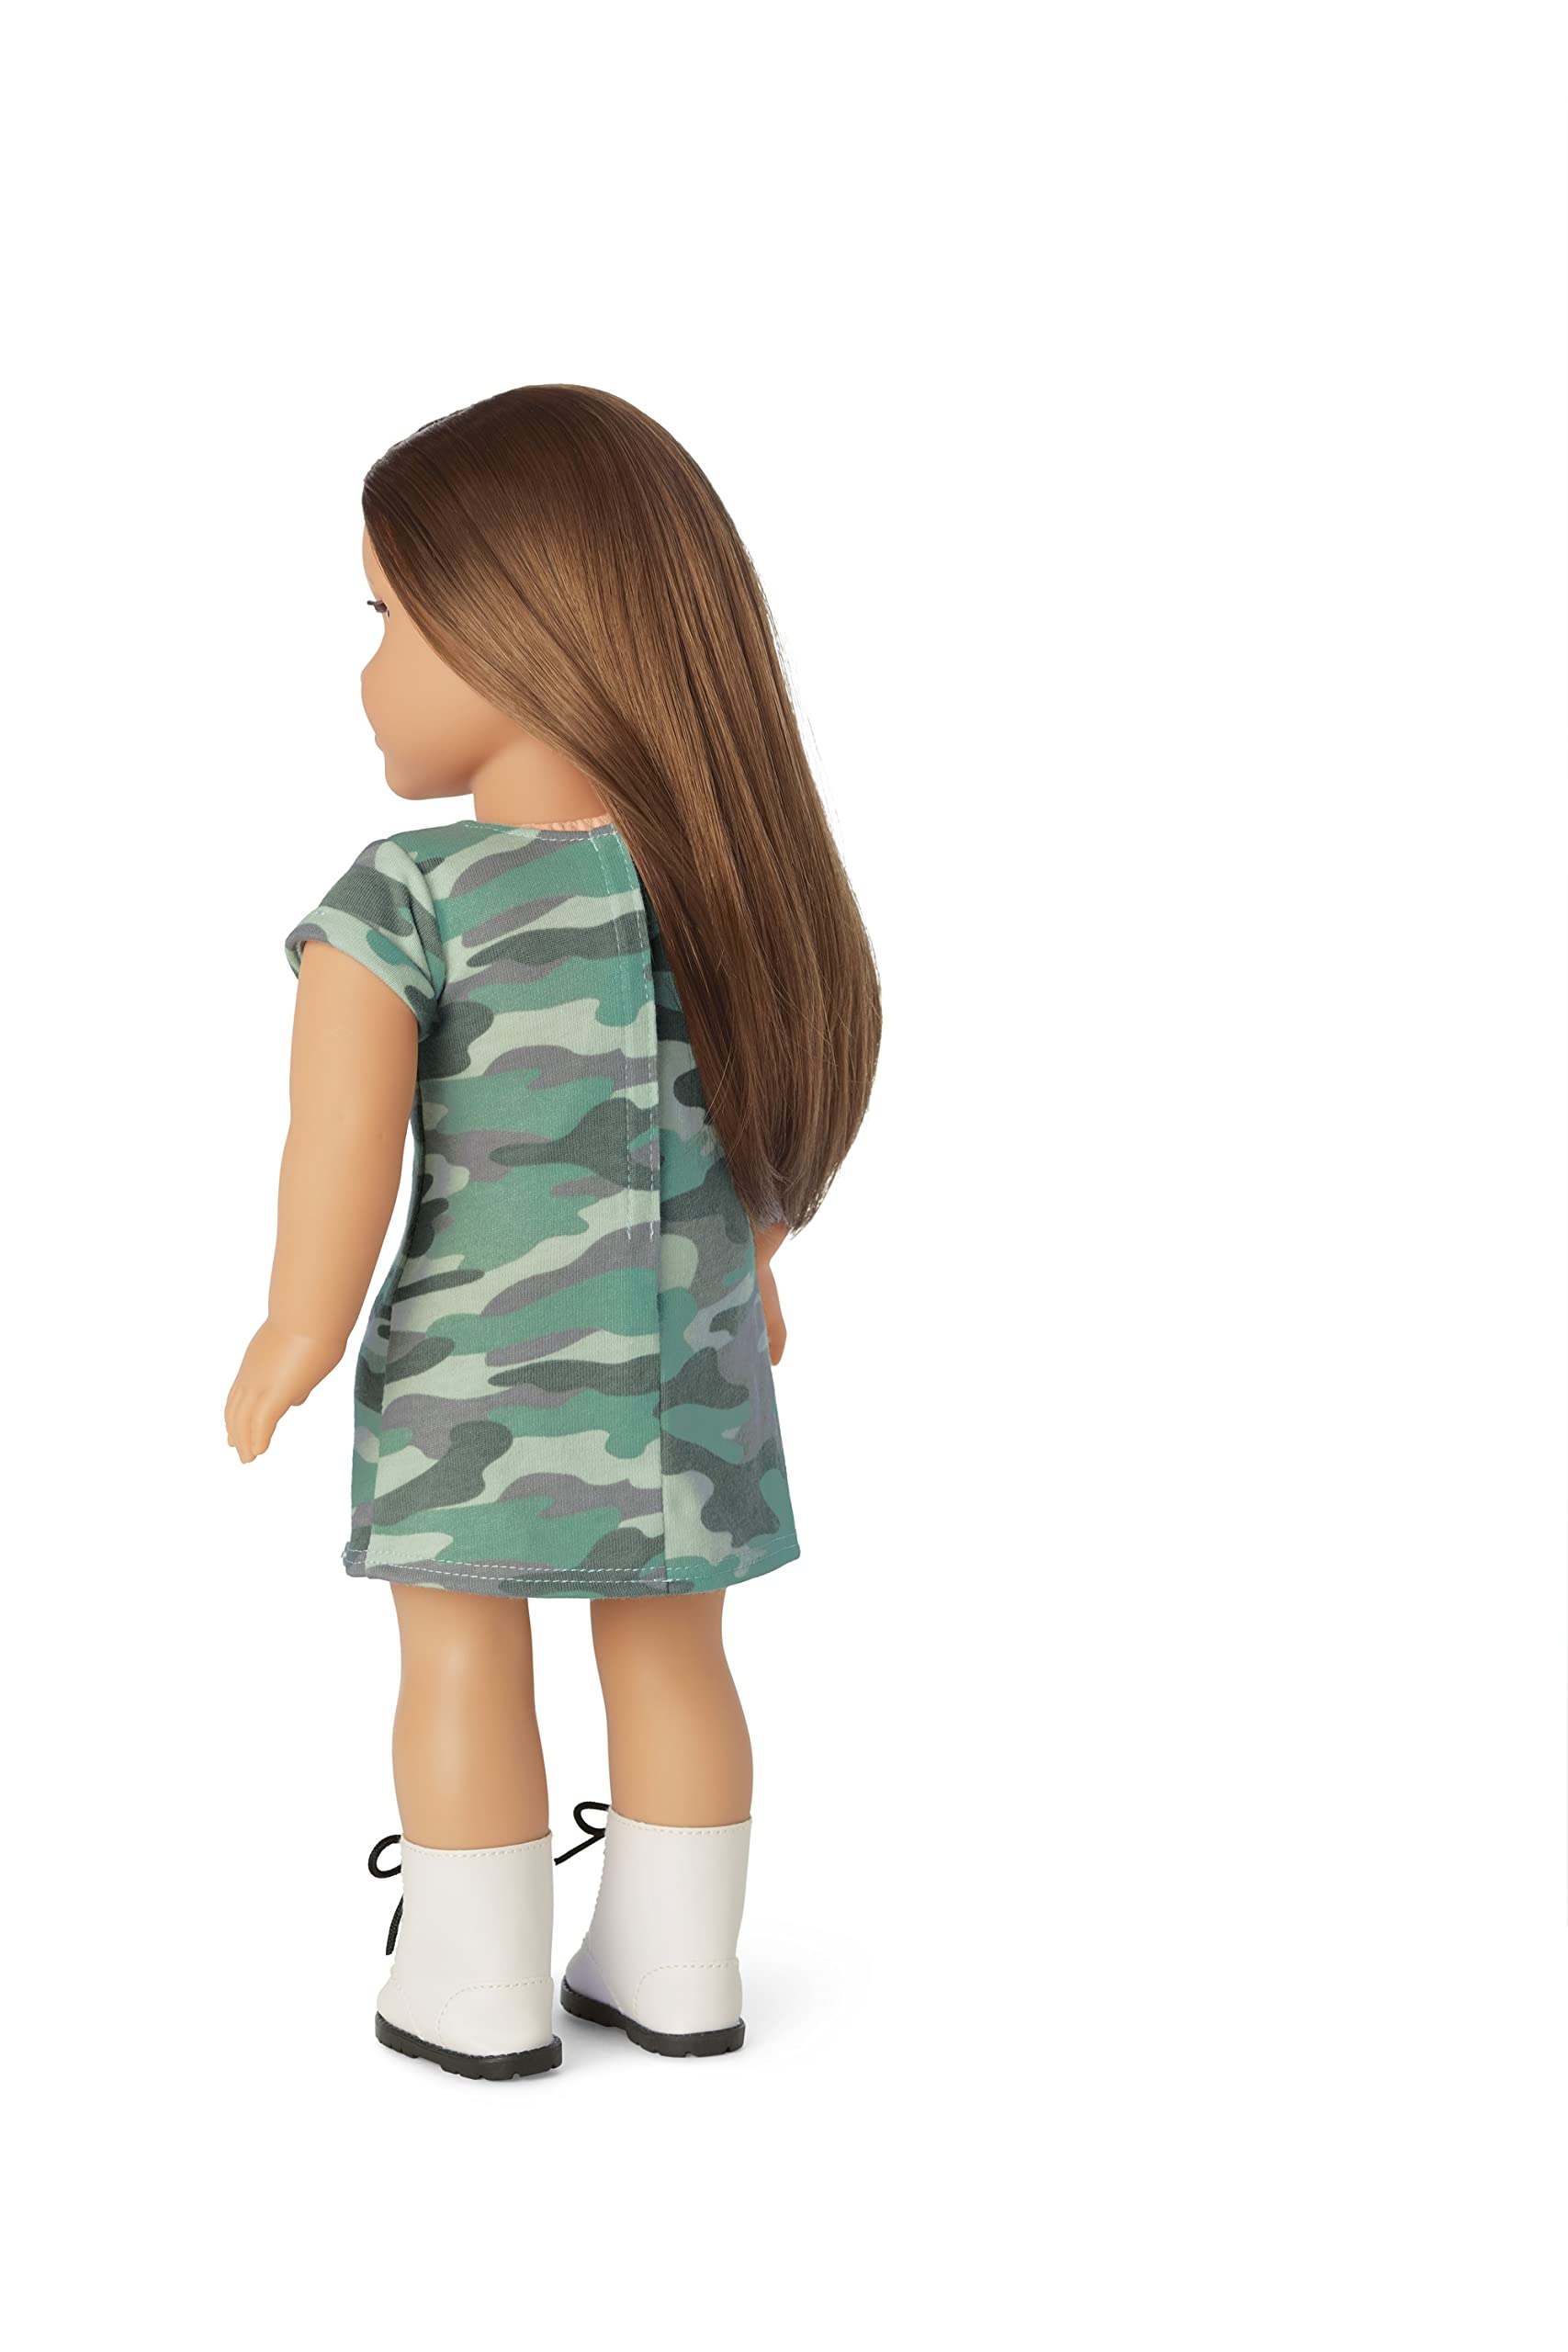 American Girl Truly Me 18-inch Doll #107 with Brown Eyes, Brown Hair, Light-to-Medium Skin, Camo T-shirt Dress, For Ages 6+